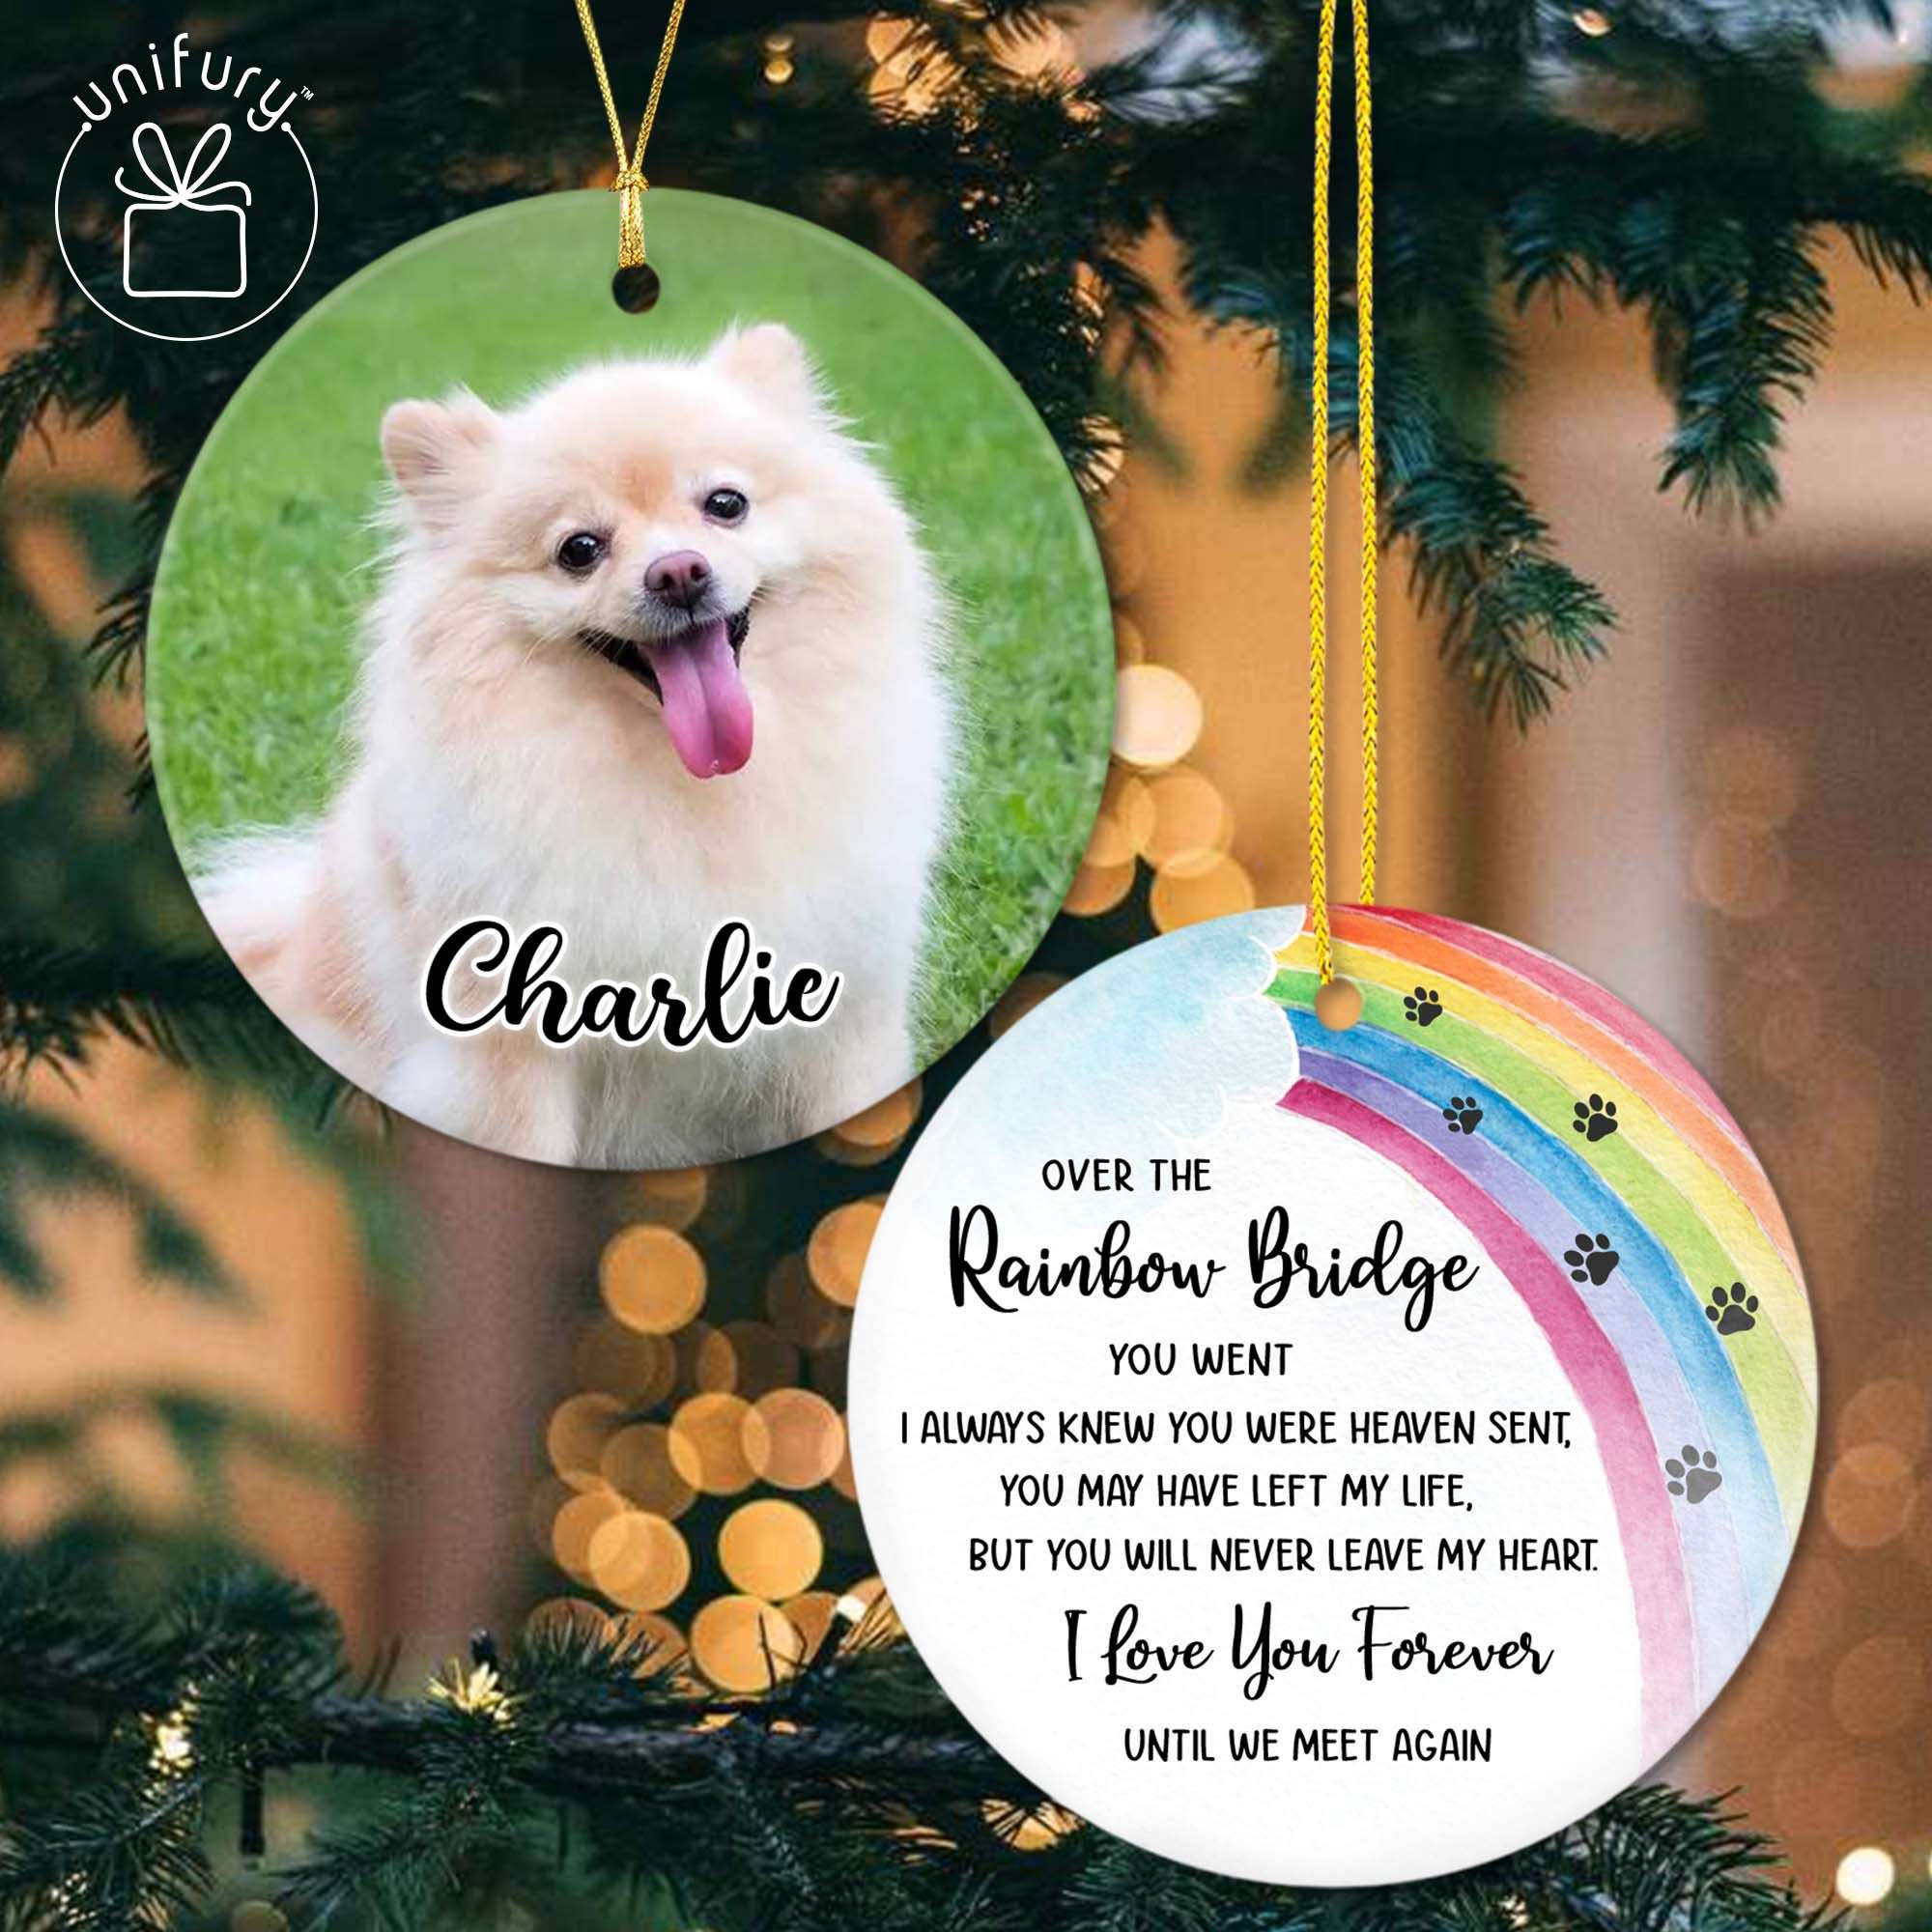 2023 Dog Christmas Ornaments: Personalized Christmas Tree Decor for Dog  Lovers - Forever in My Heart - Pet Memorial Ornament, Custom Dog Ornaments  for